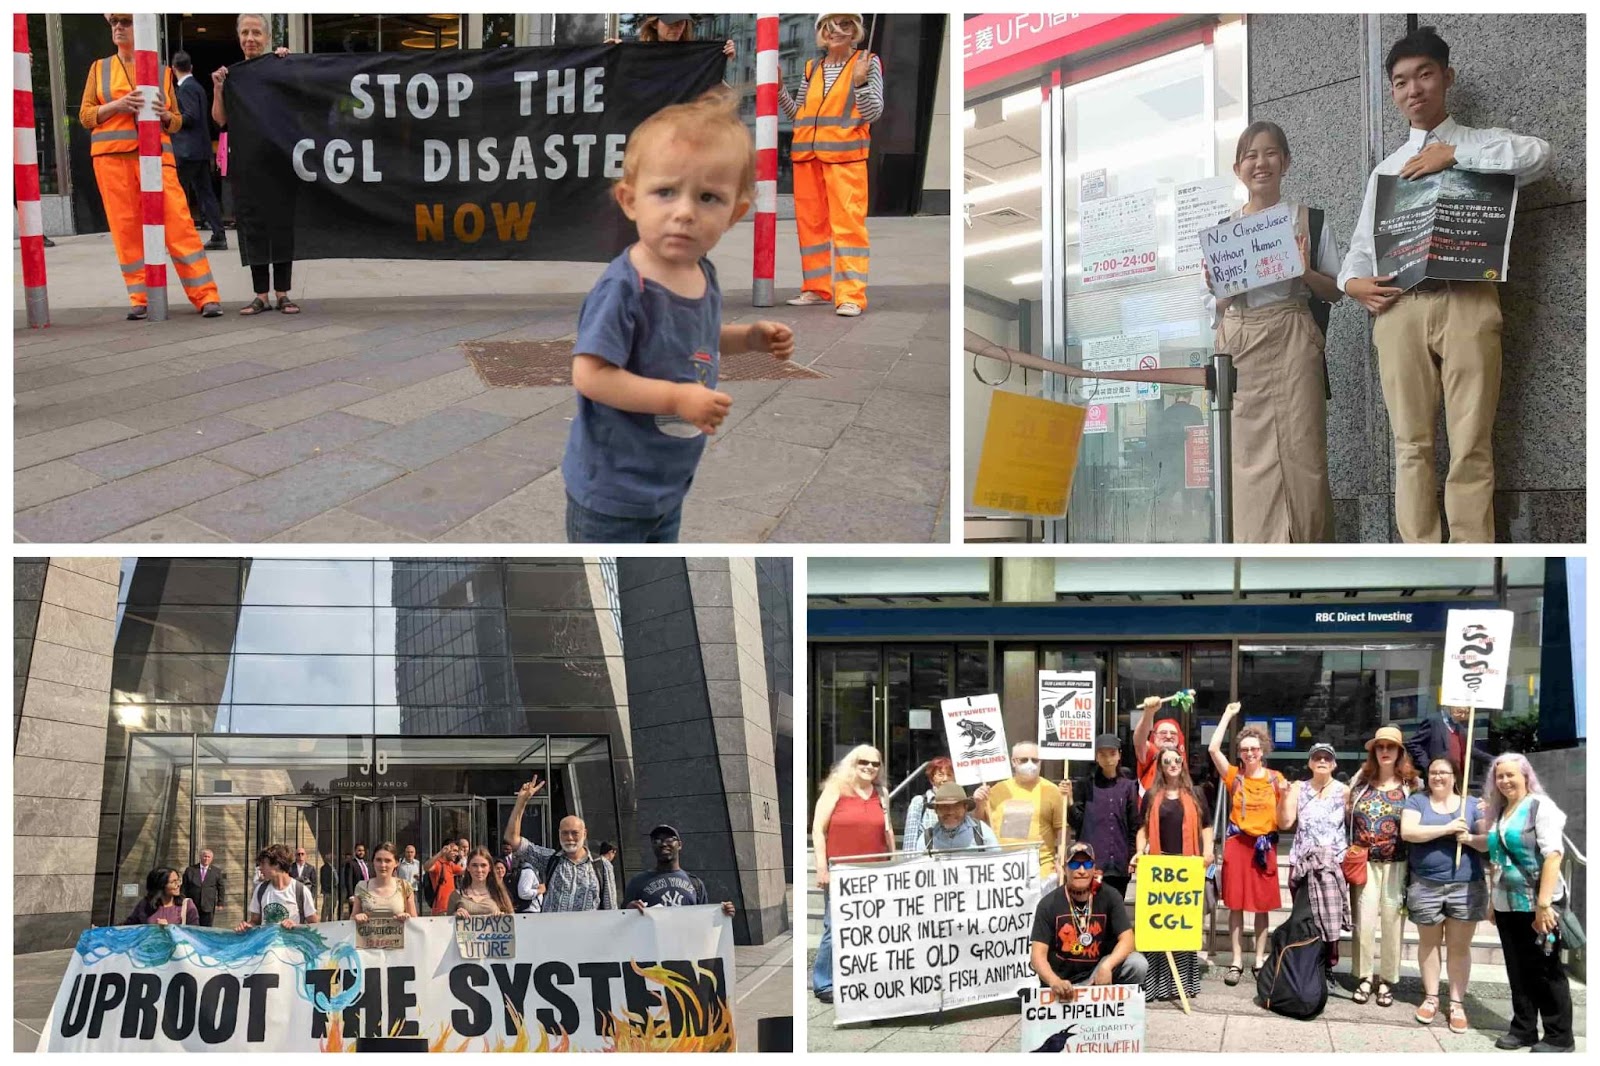 A montage of rallies outside banks in the UK US Canada and Japan. In the UK a small child wanders into shot.